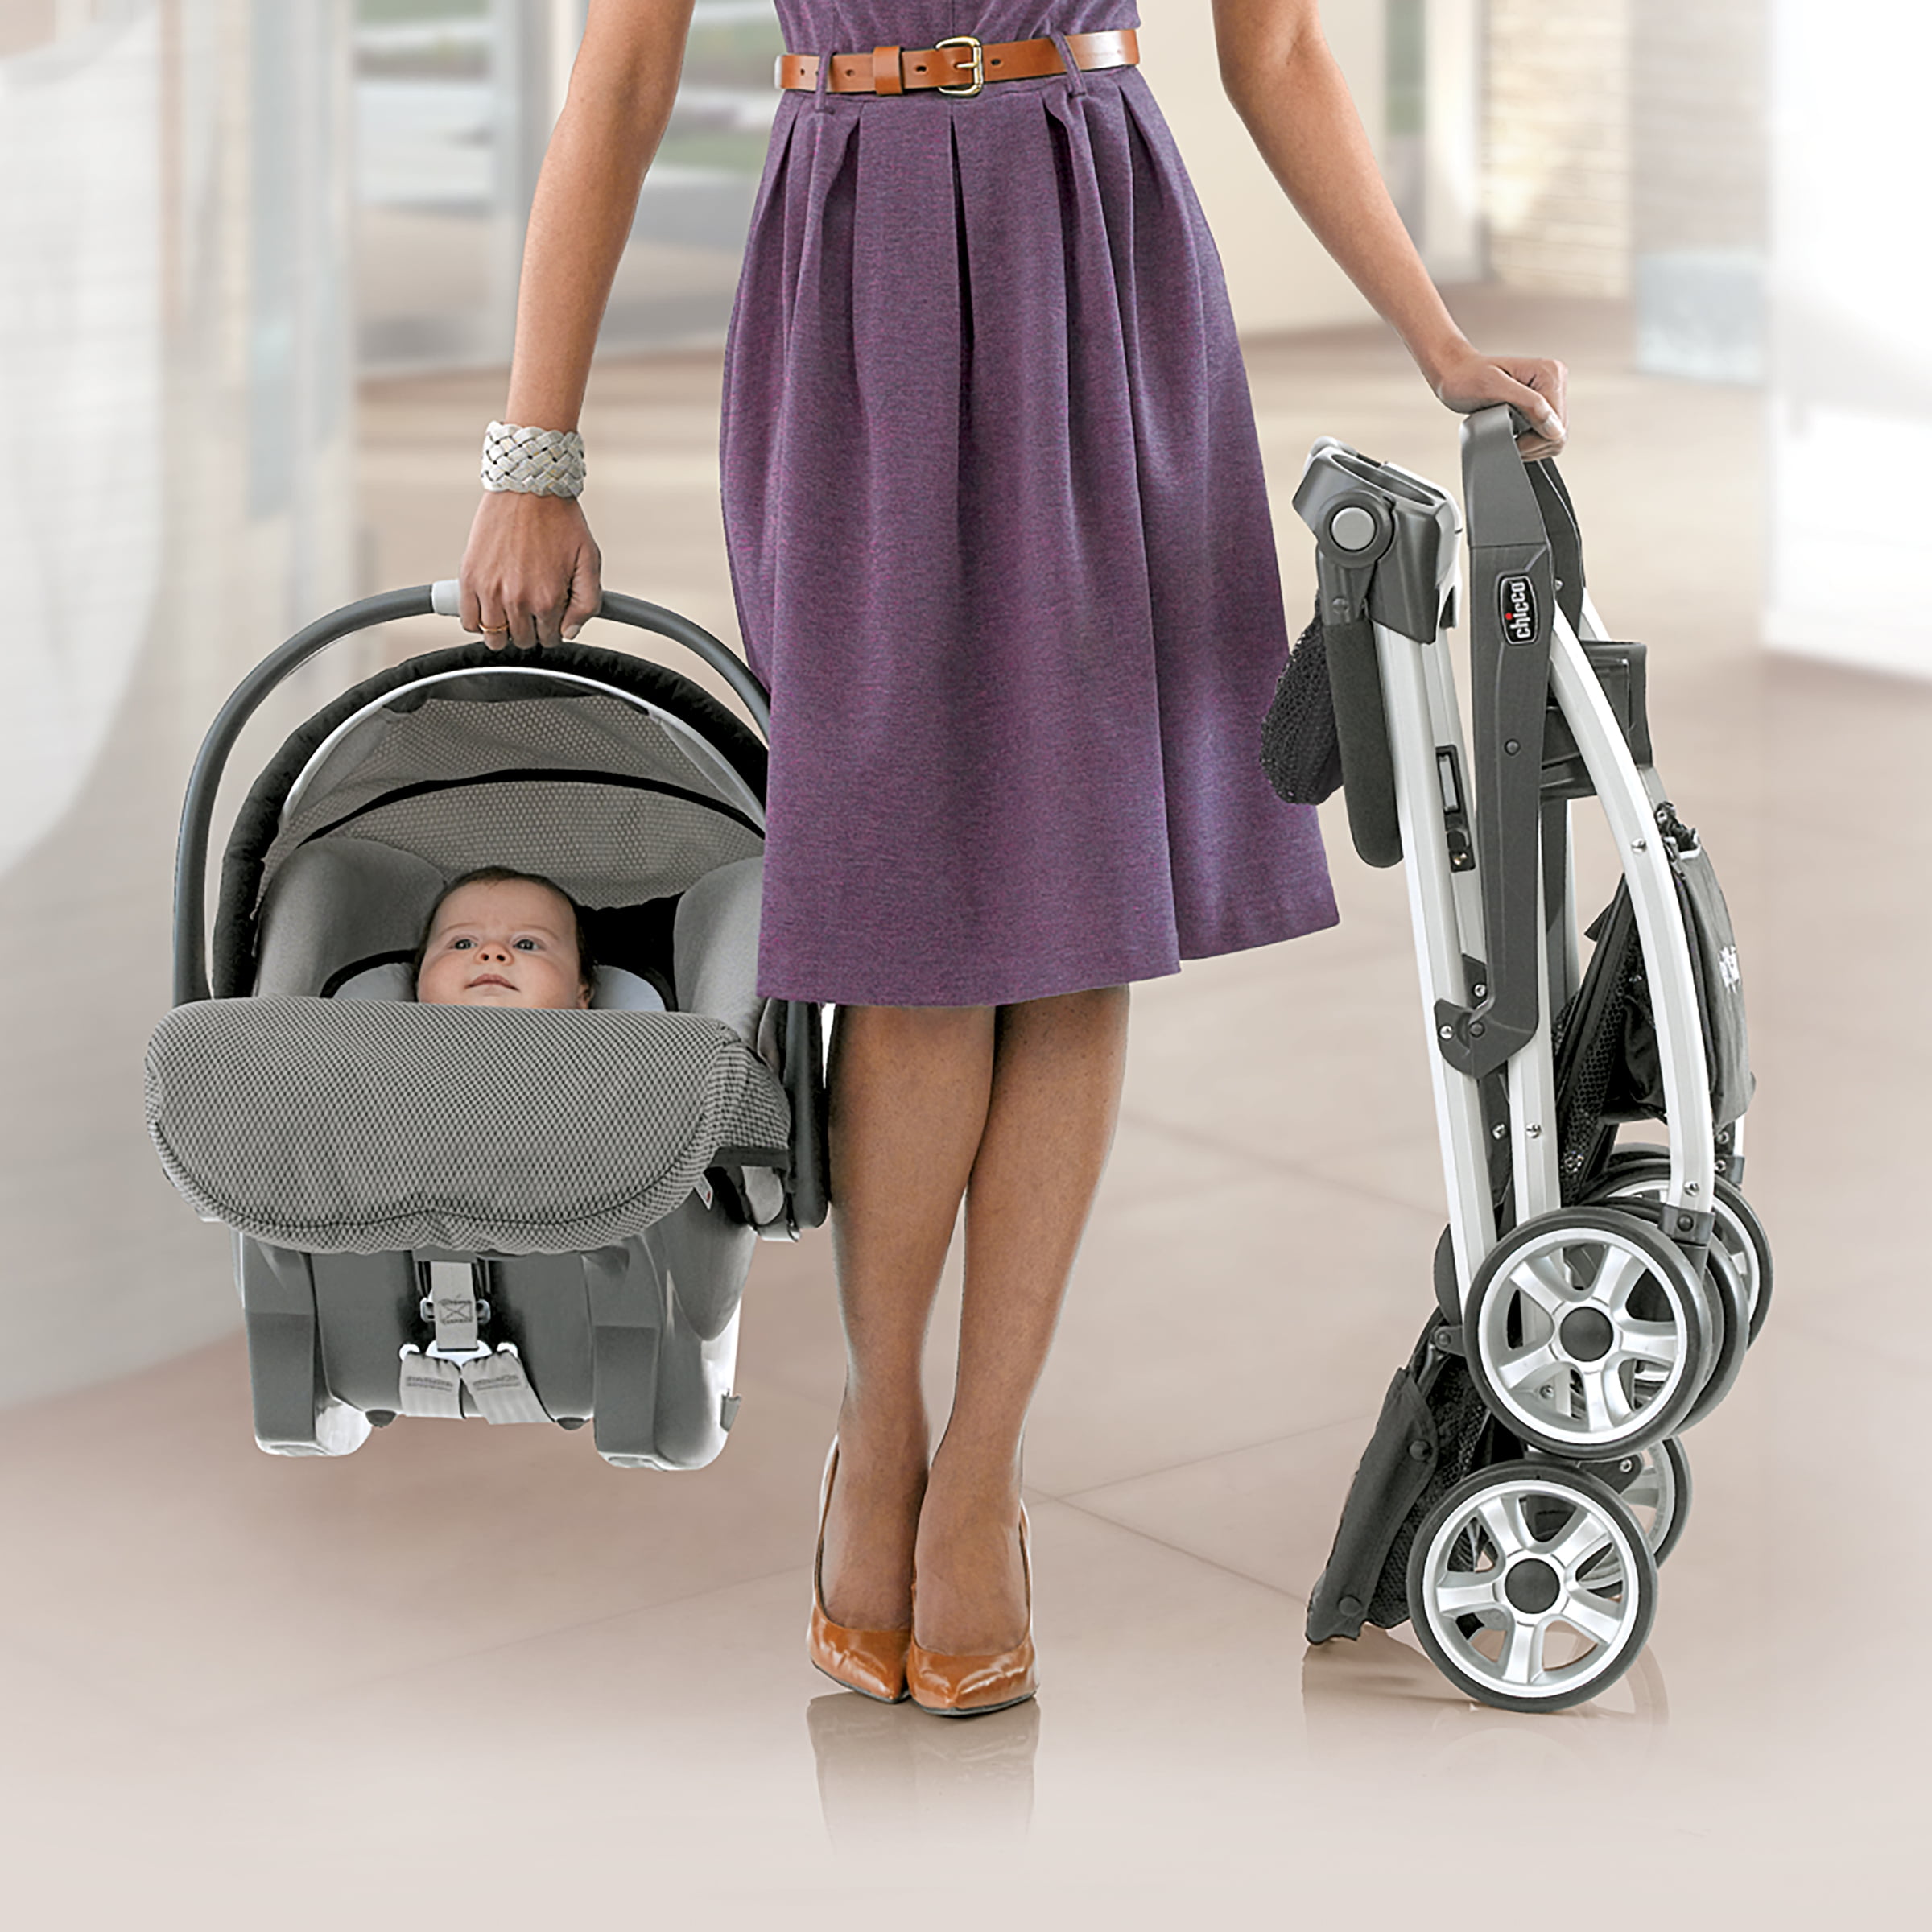 chicco snap and go stroller